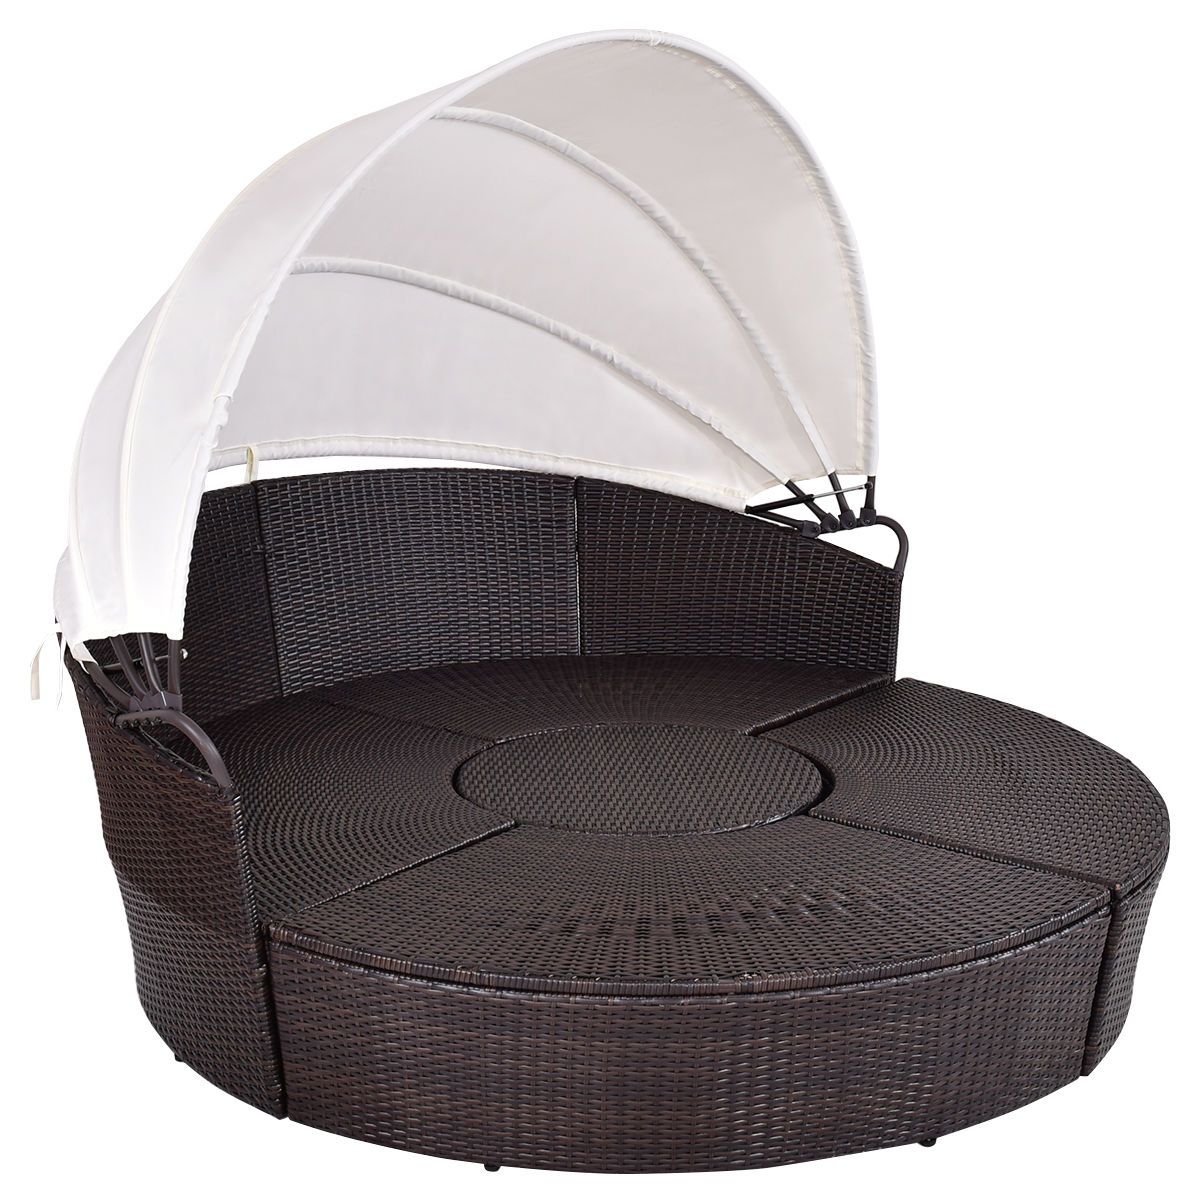 Jacinto - Canopy Cushioned Round Daybed Sofa